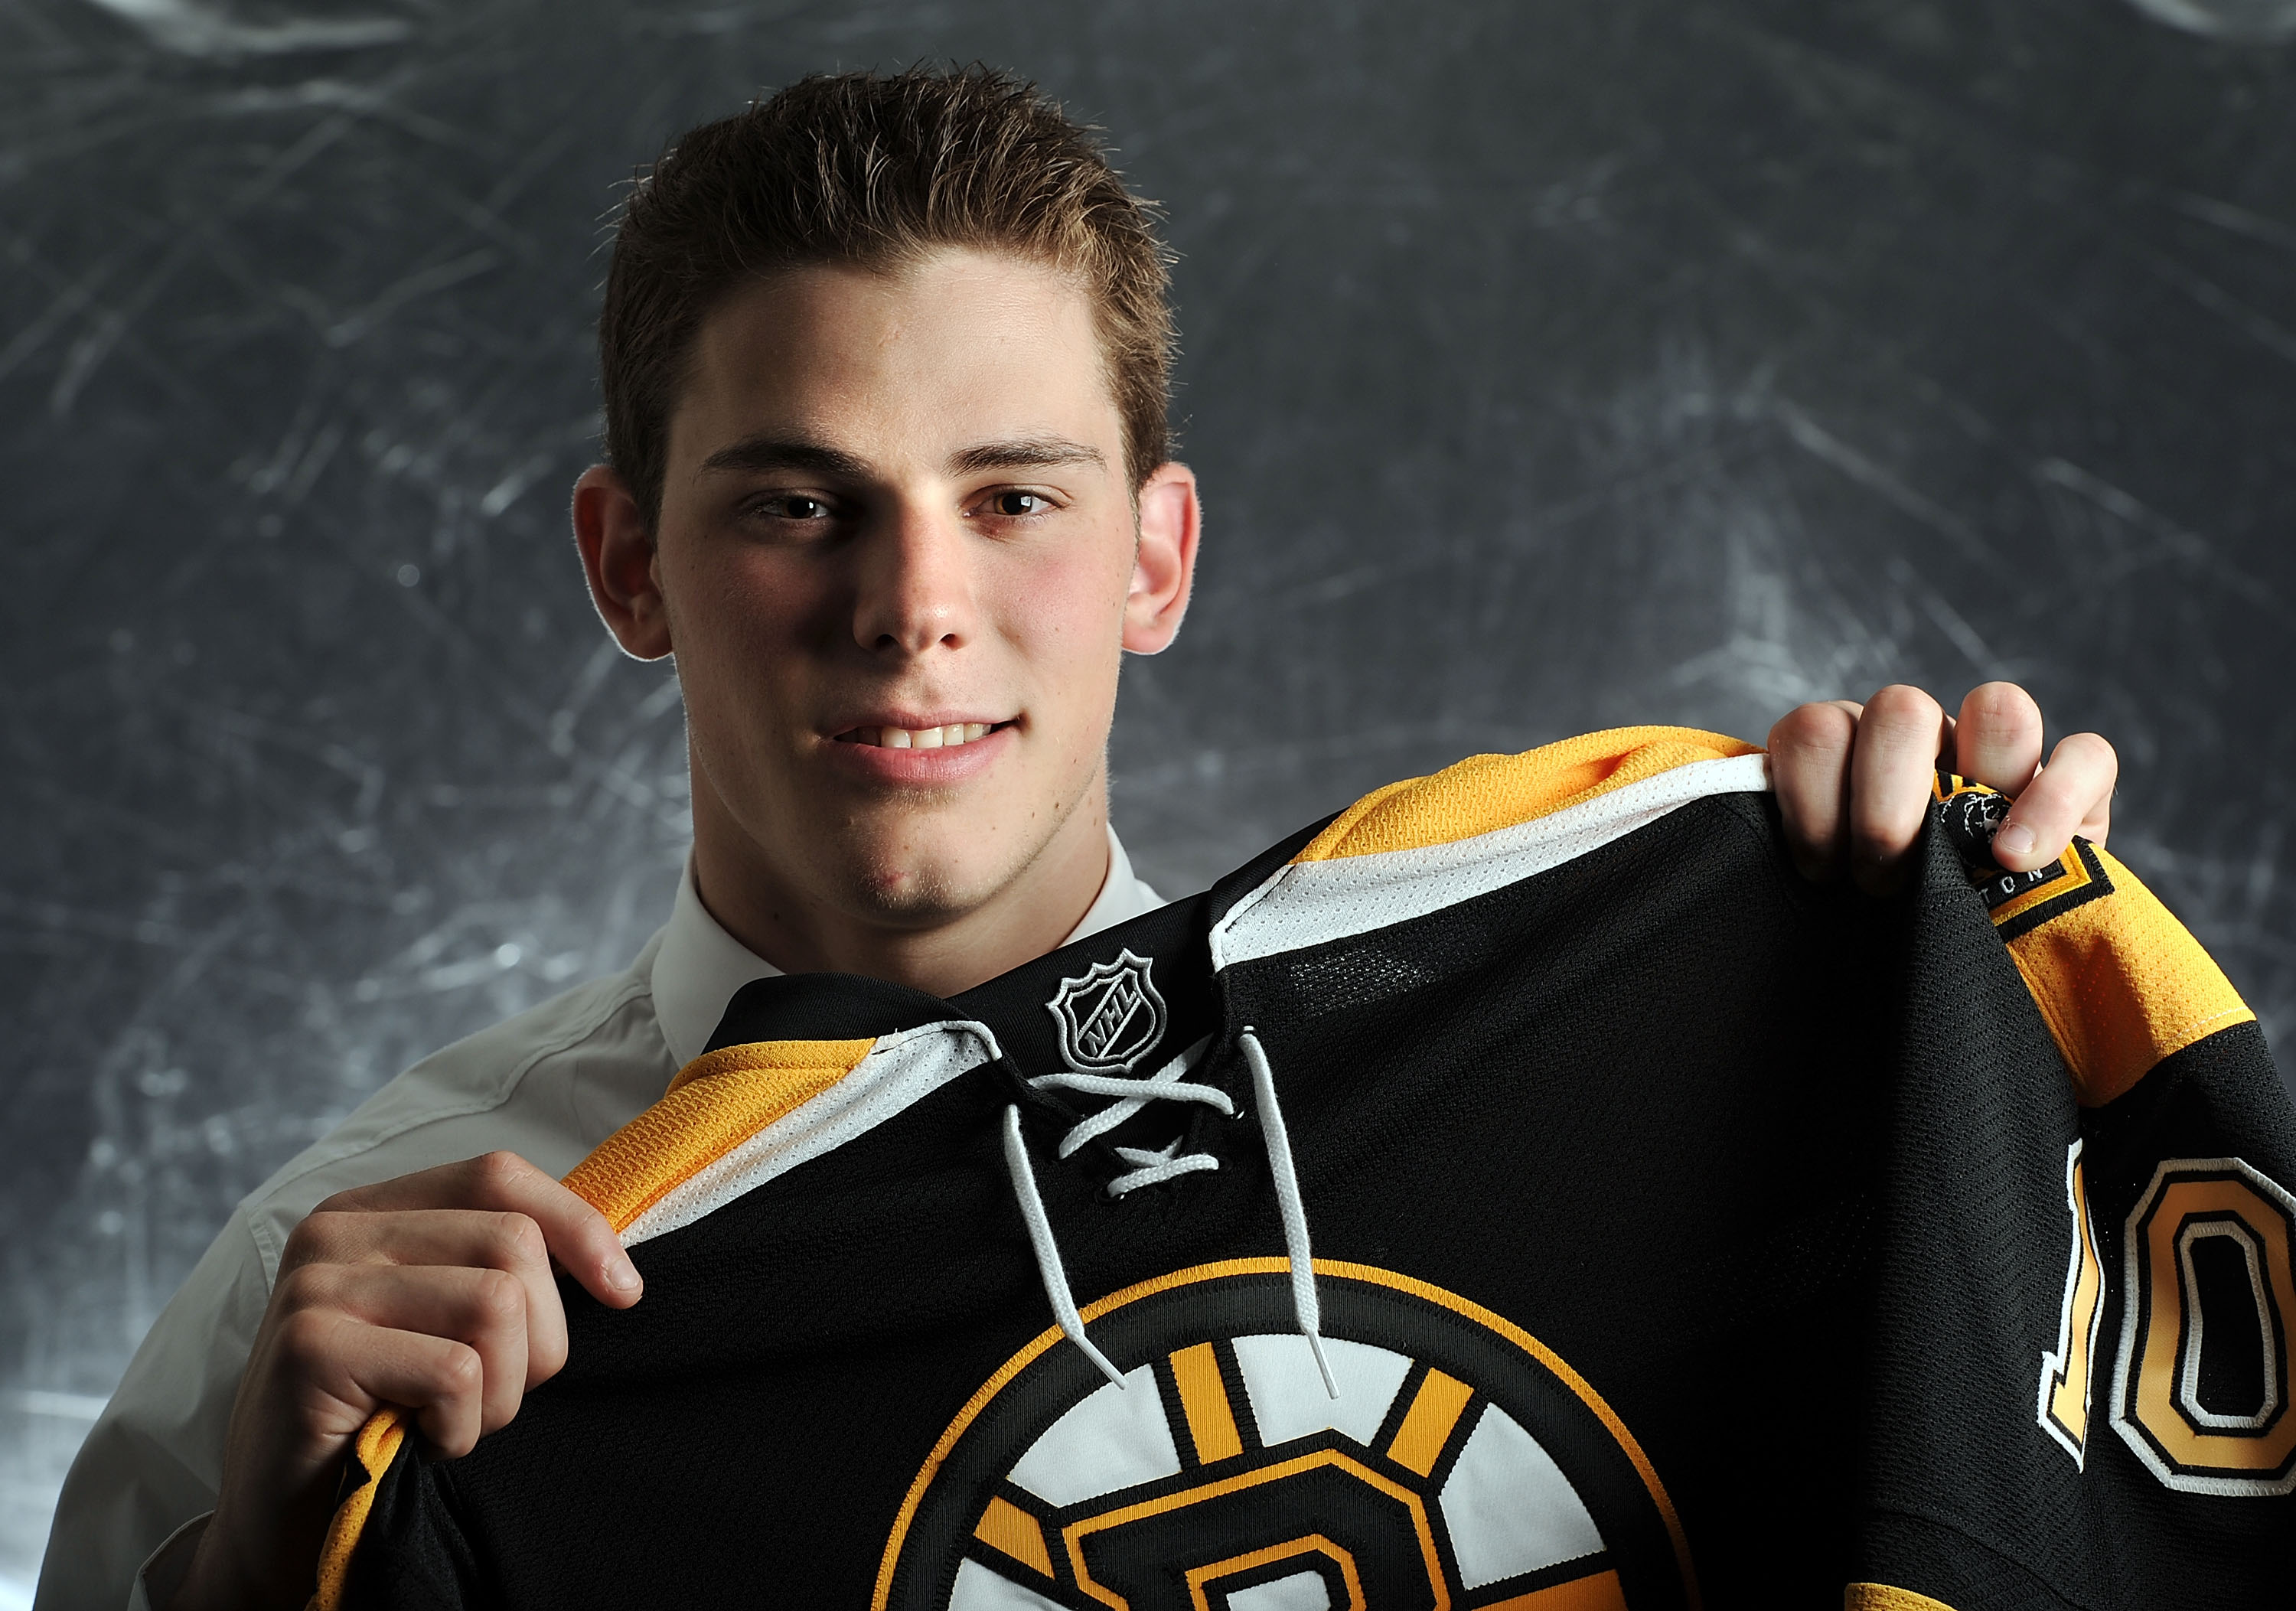 LOS ANGELES, CA - JUNE 25:  Tyler Seguin, drafted second overall by the Boston Bruins, poses for a portrait after he was drafted during the 2010 NHL Entry Draft at Staples Center on June 25, 2010 in Los Angeles, California.  (Photo by Harry How/Getty Imag